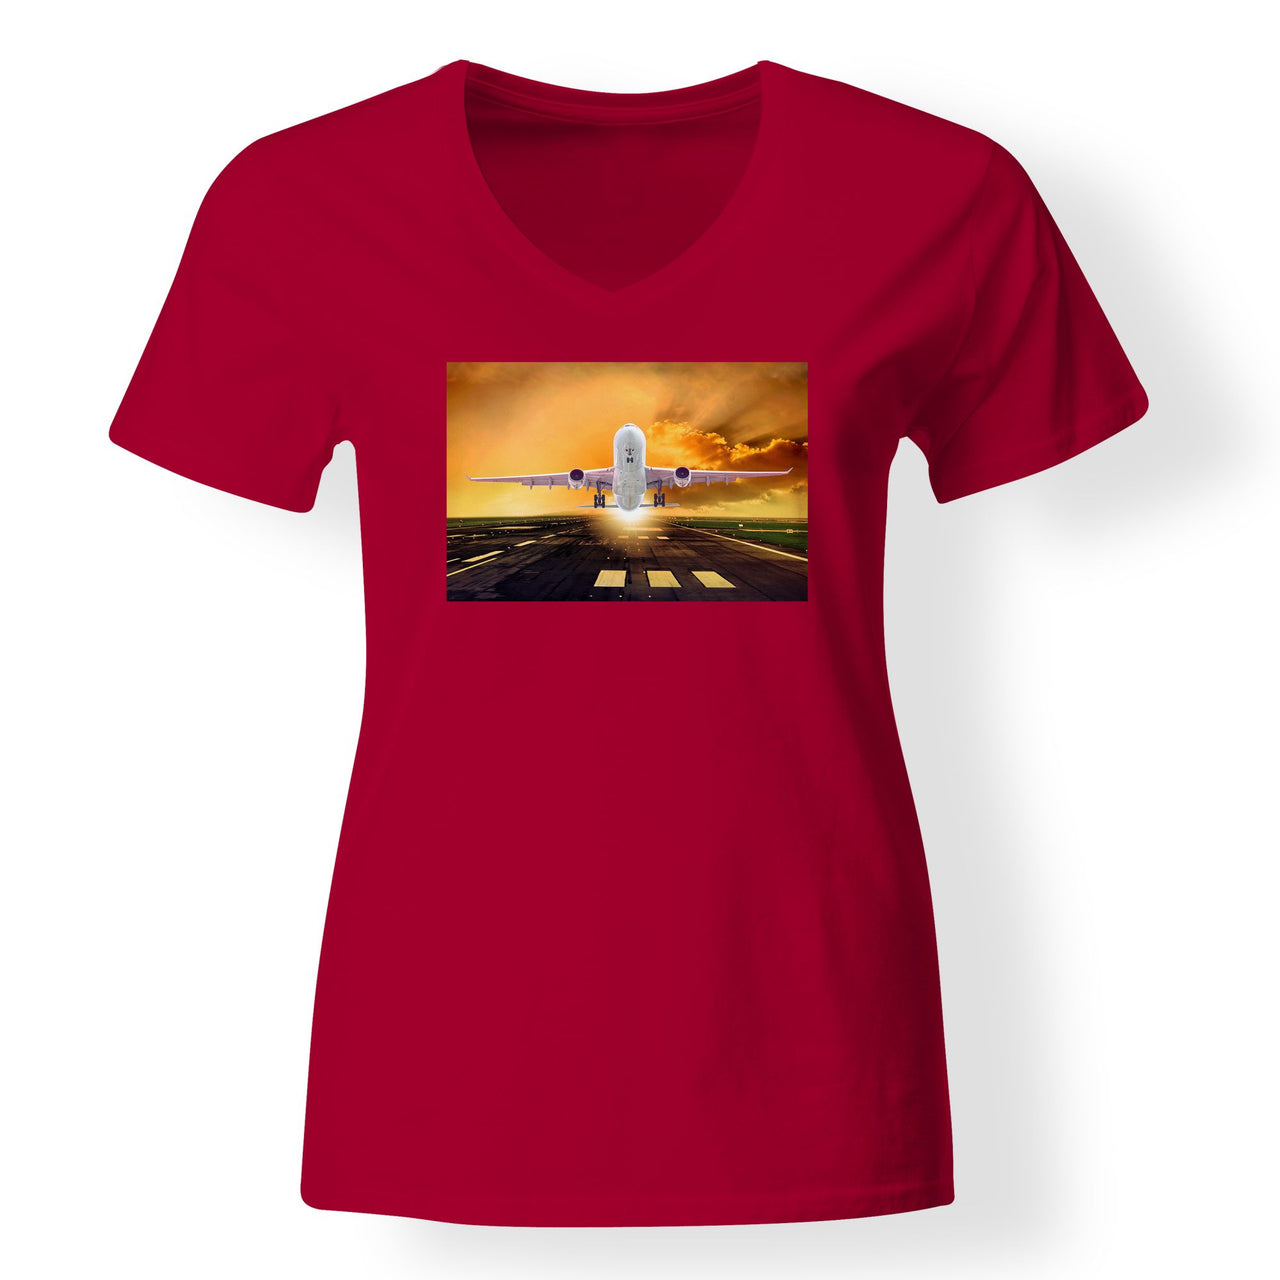 Amazing Departing Aircraft Sunset & Clouds Behind Designed V-Neck T-Shirts